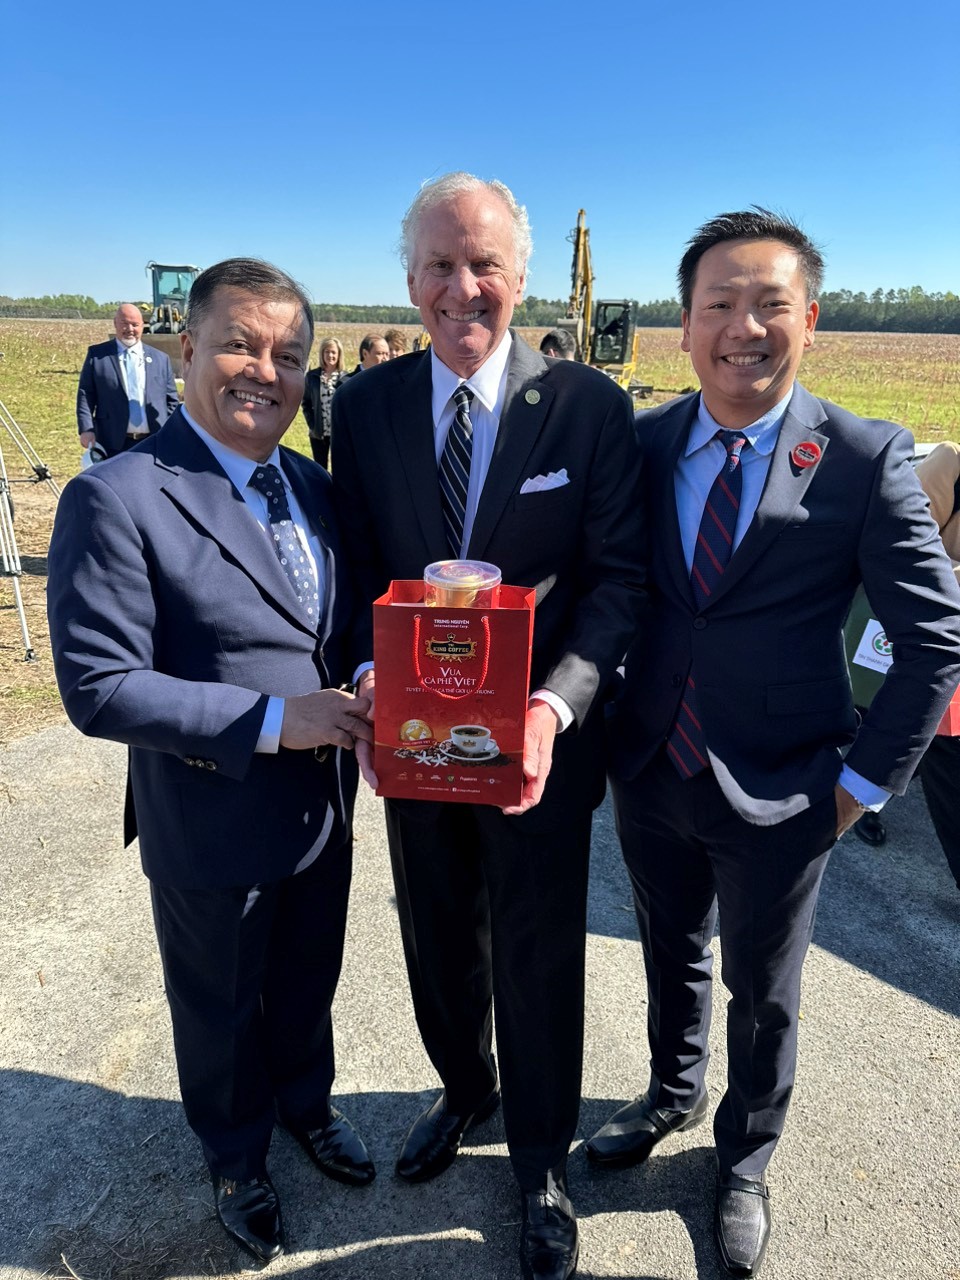 Mr. Tran Dinh Quyen - Chairman of Tin Thanh Group (left), Representative of King Coffee, and Mr. Henry Dargan McMaster - Governor of South Carolina (center).